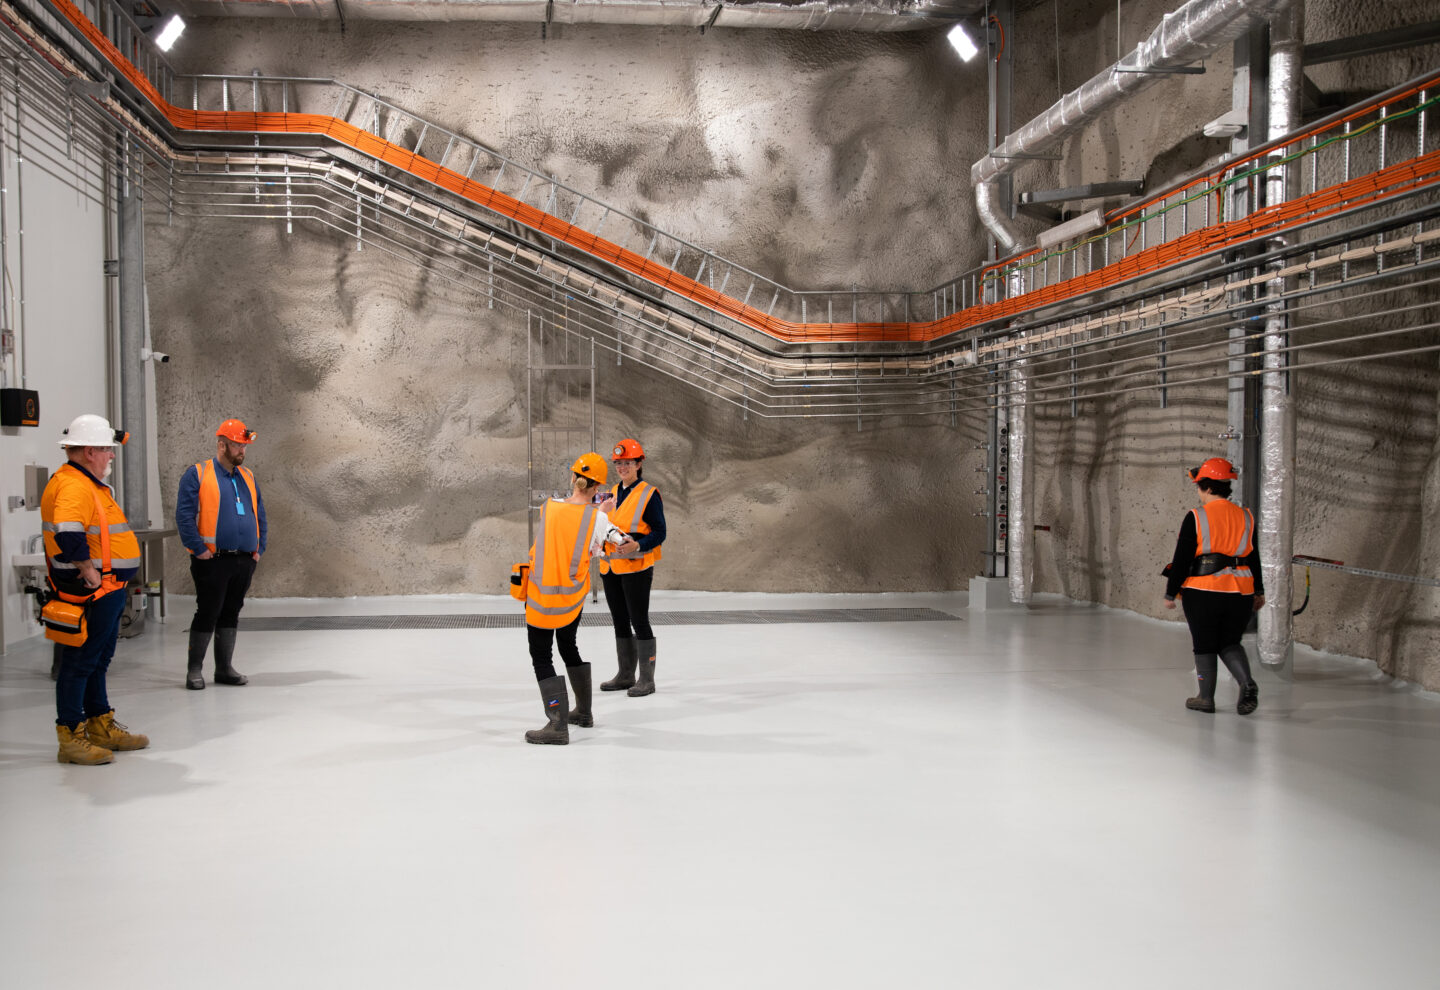 A cave like space with piped on the walls and six people in high vis and orange helmets walking around